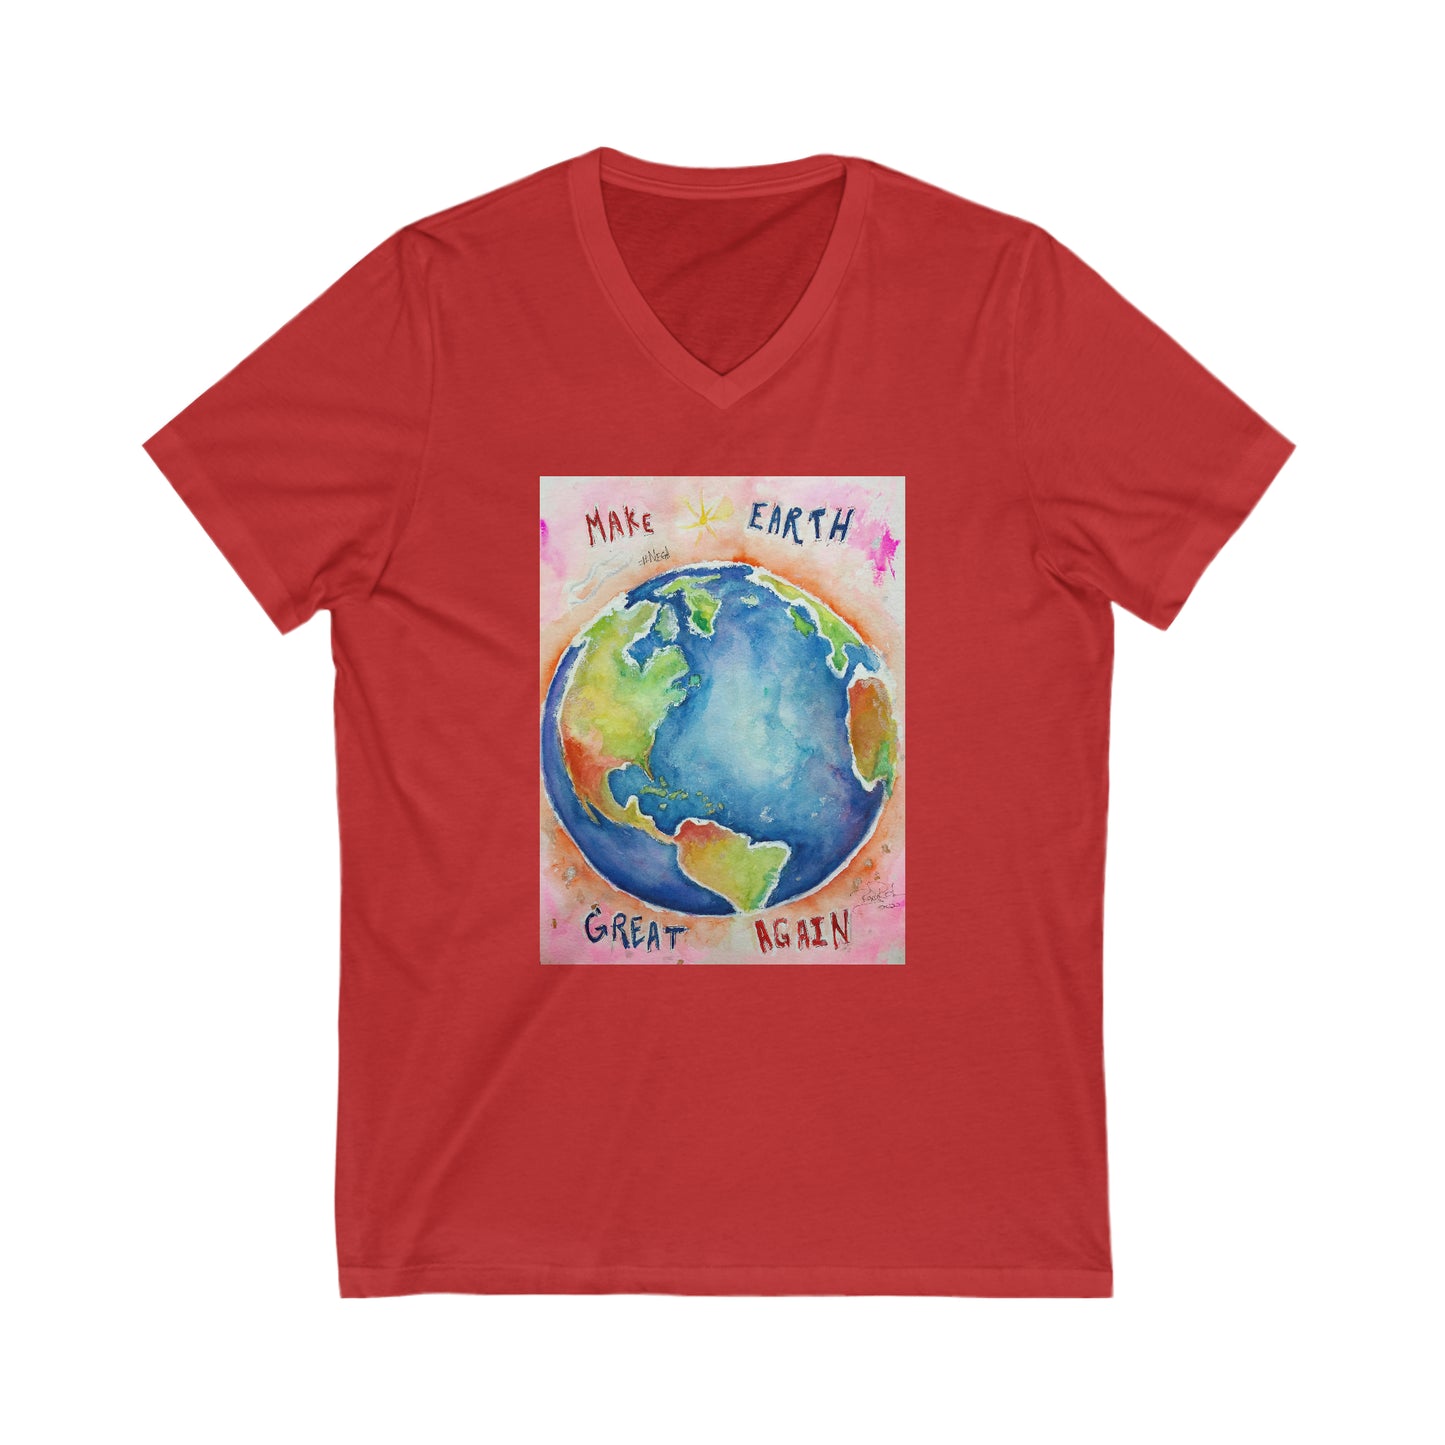 Make Earth Great Again-Unisexe Jersey Manches courtes Col en V Tee